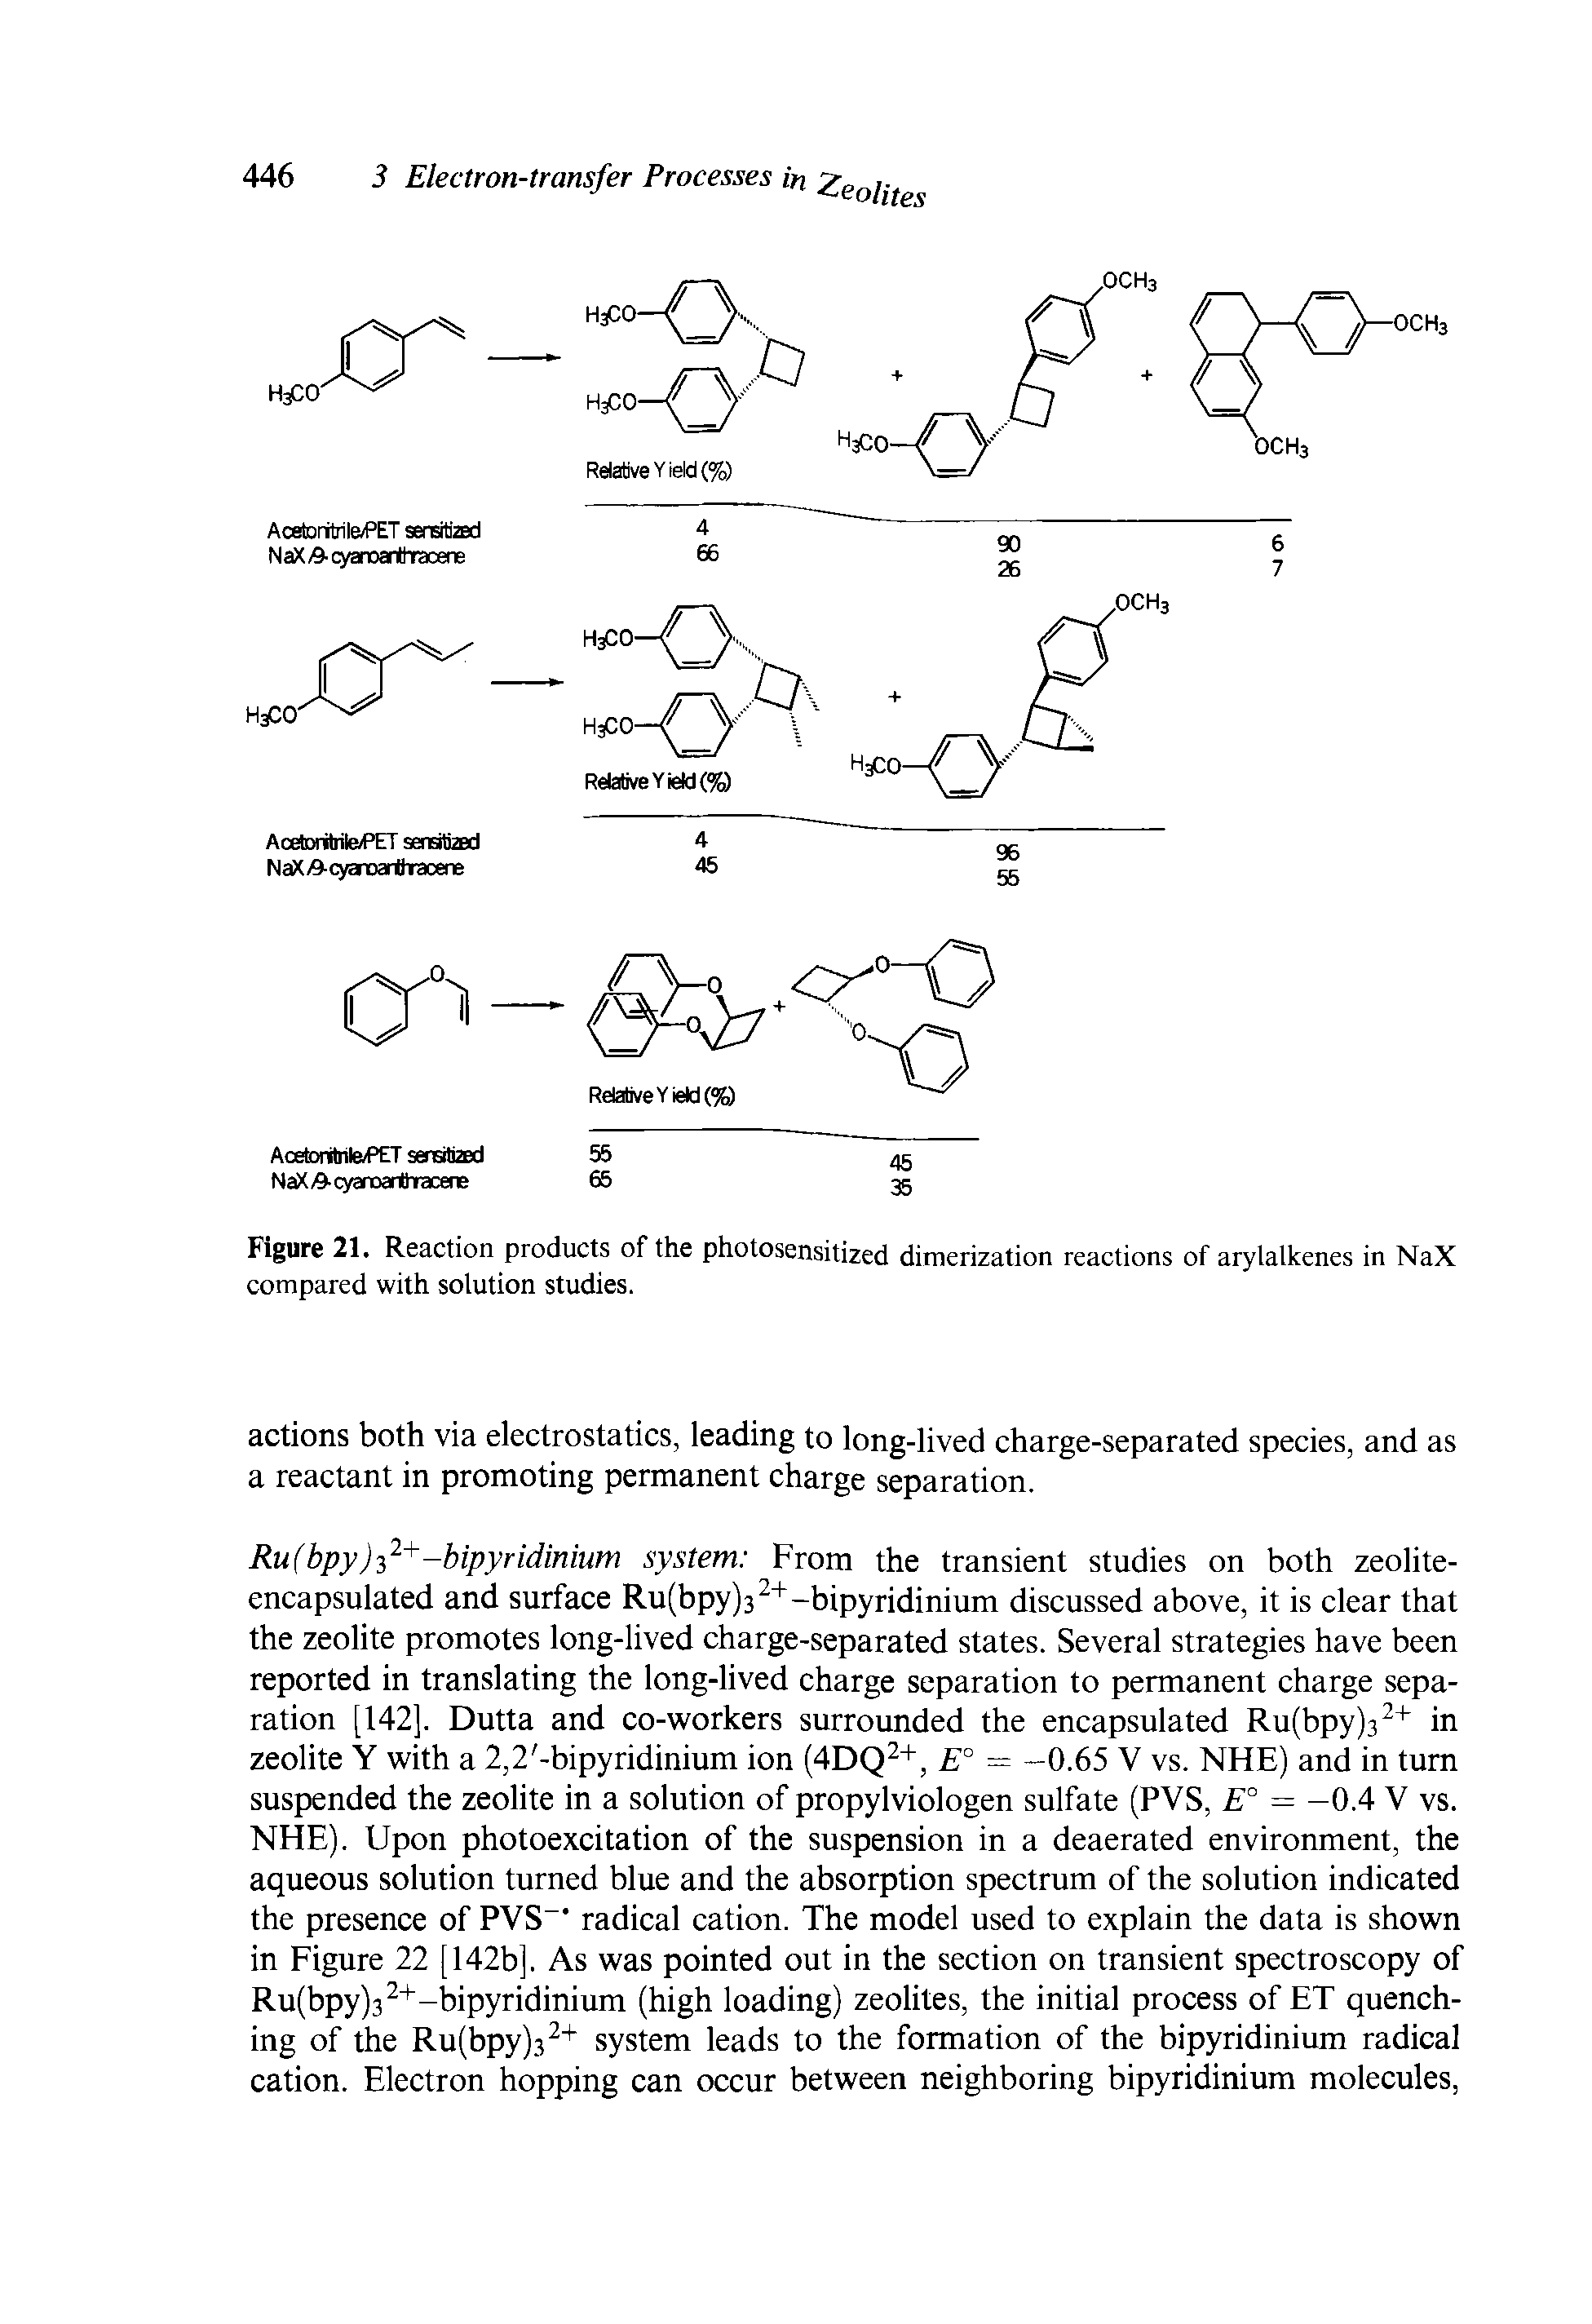 Figure 21. Reaction products of the photosensitized dimerization reactions of arylalkenes in NaX compared with solution studies.